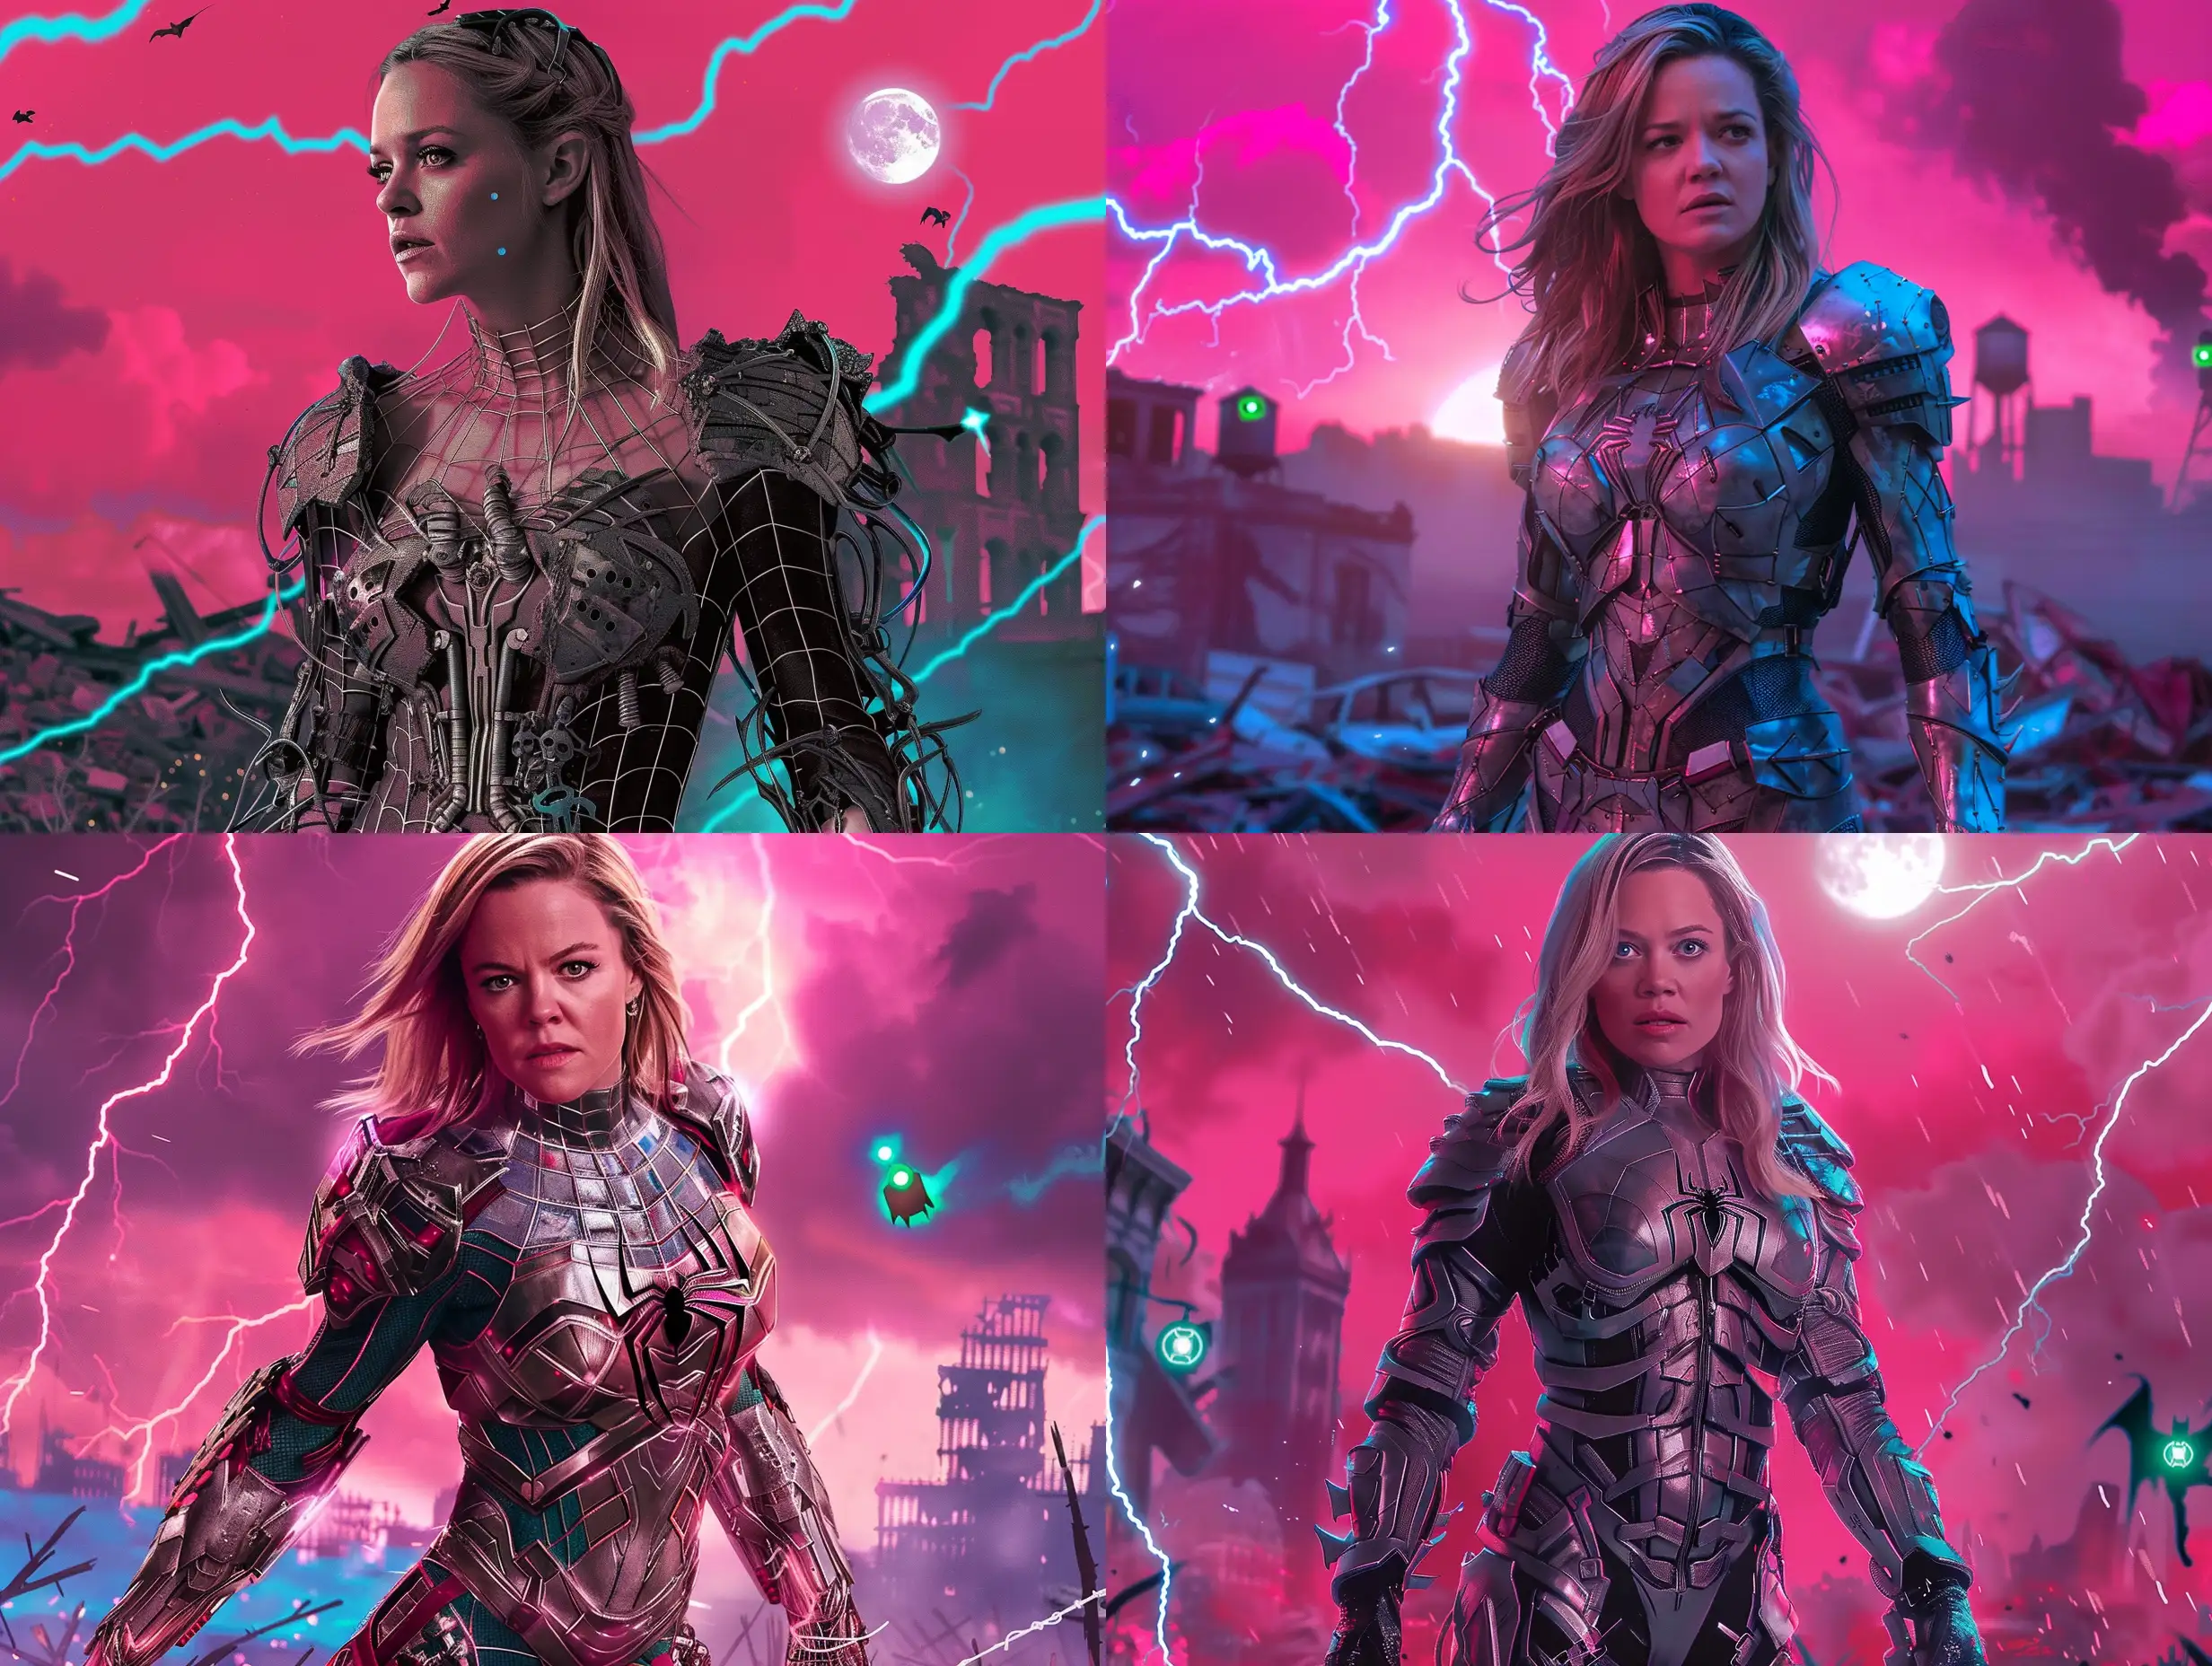 Reese-Witherspoon-as-Metal-Spiderwoman-Nighttime-Superhero-Pose-in-a-Pink-Sky